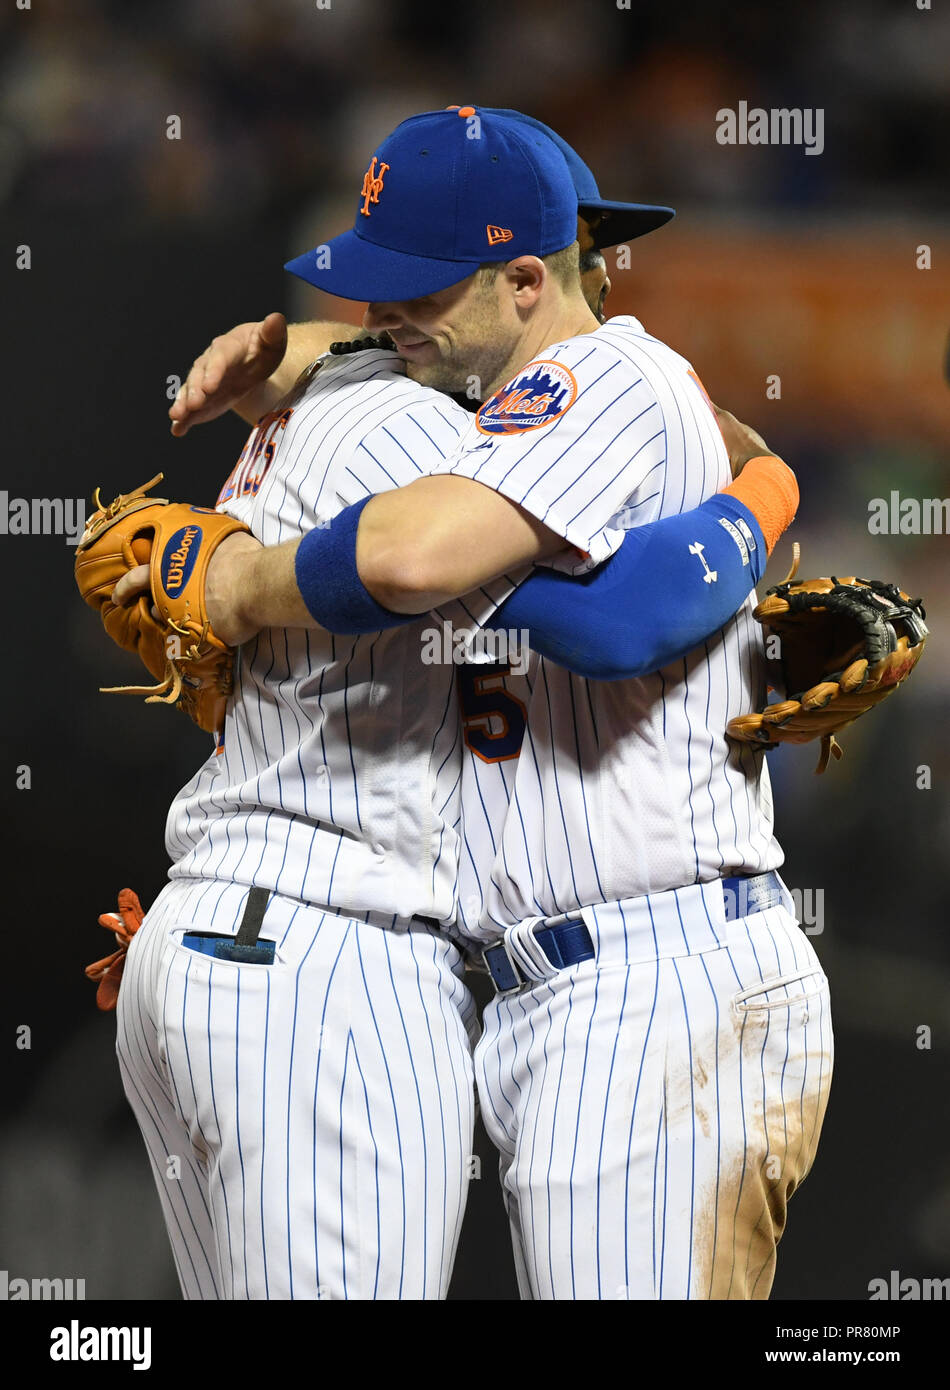 New York, NY, USA. 29th Sep, 2018. David Wright hugs Shortstop Jose Reyes  goodbye as he exits the game in his last NY Mets appearance before retiring  before the end of the